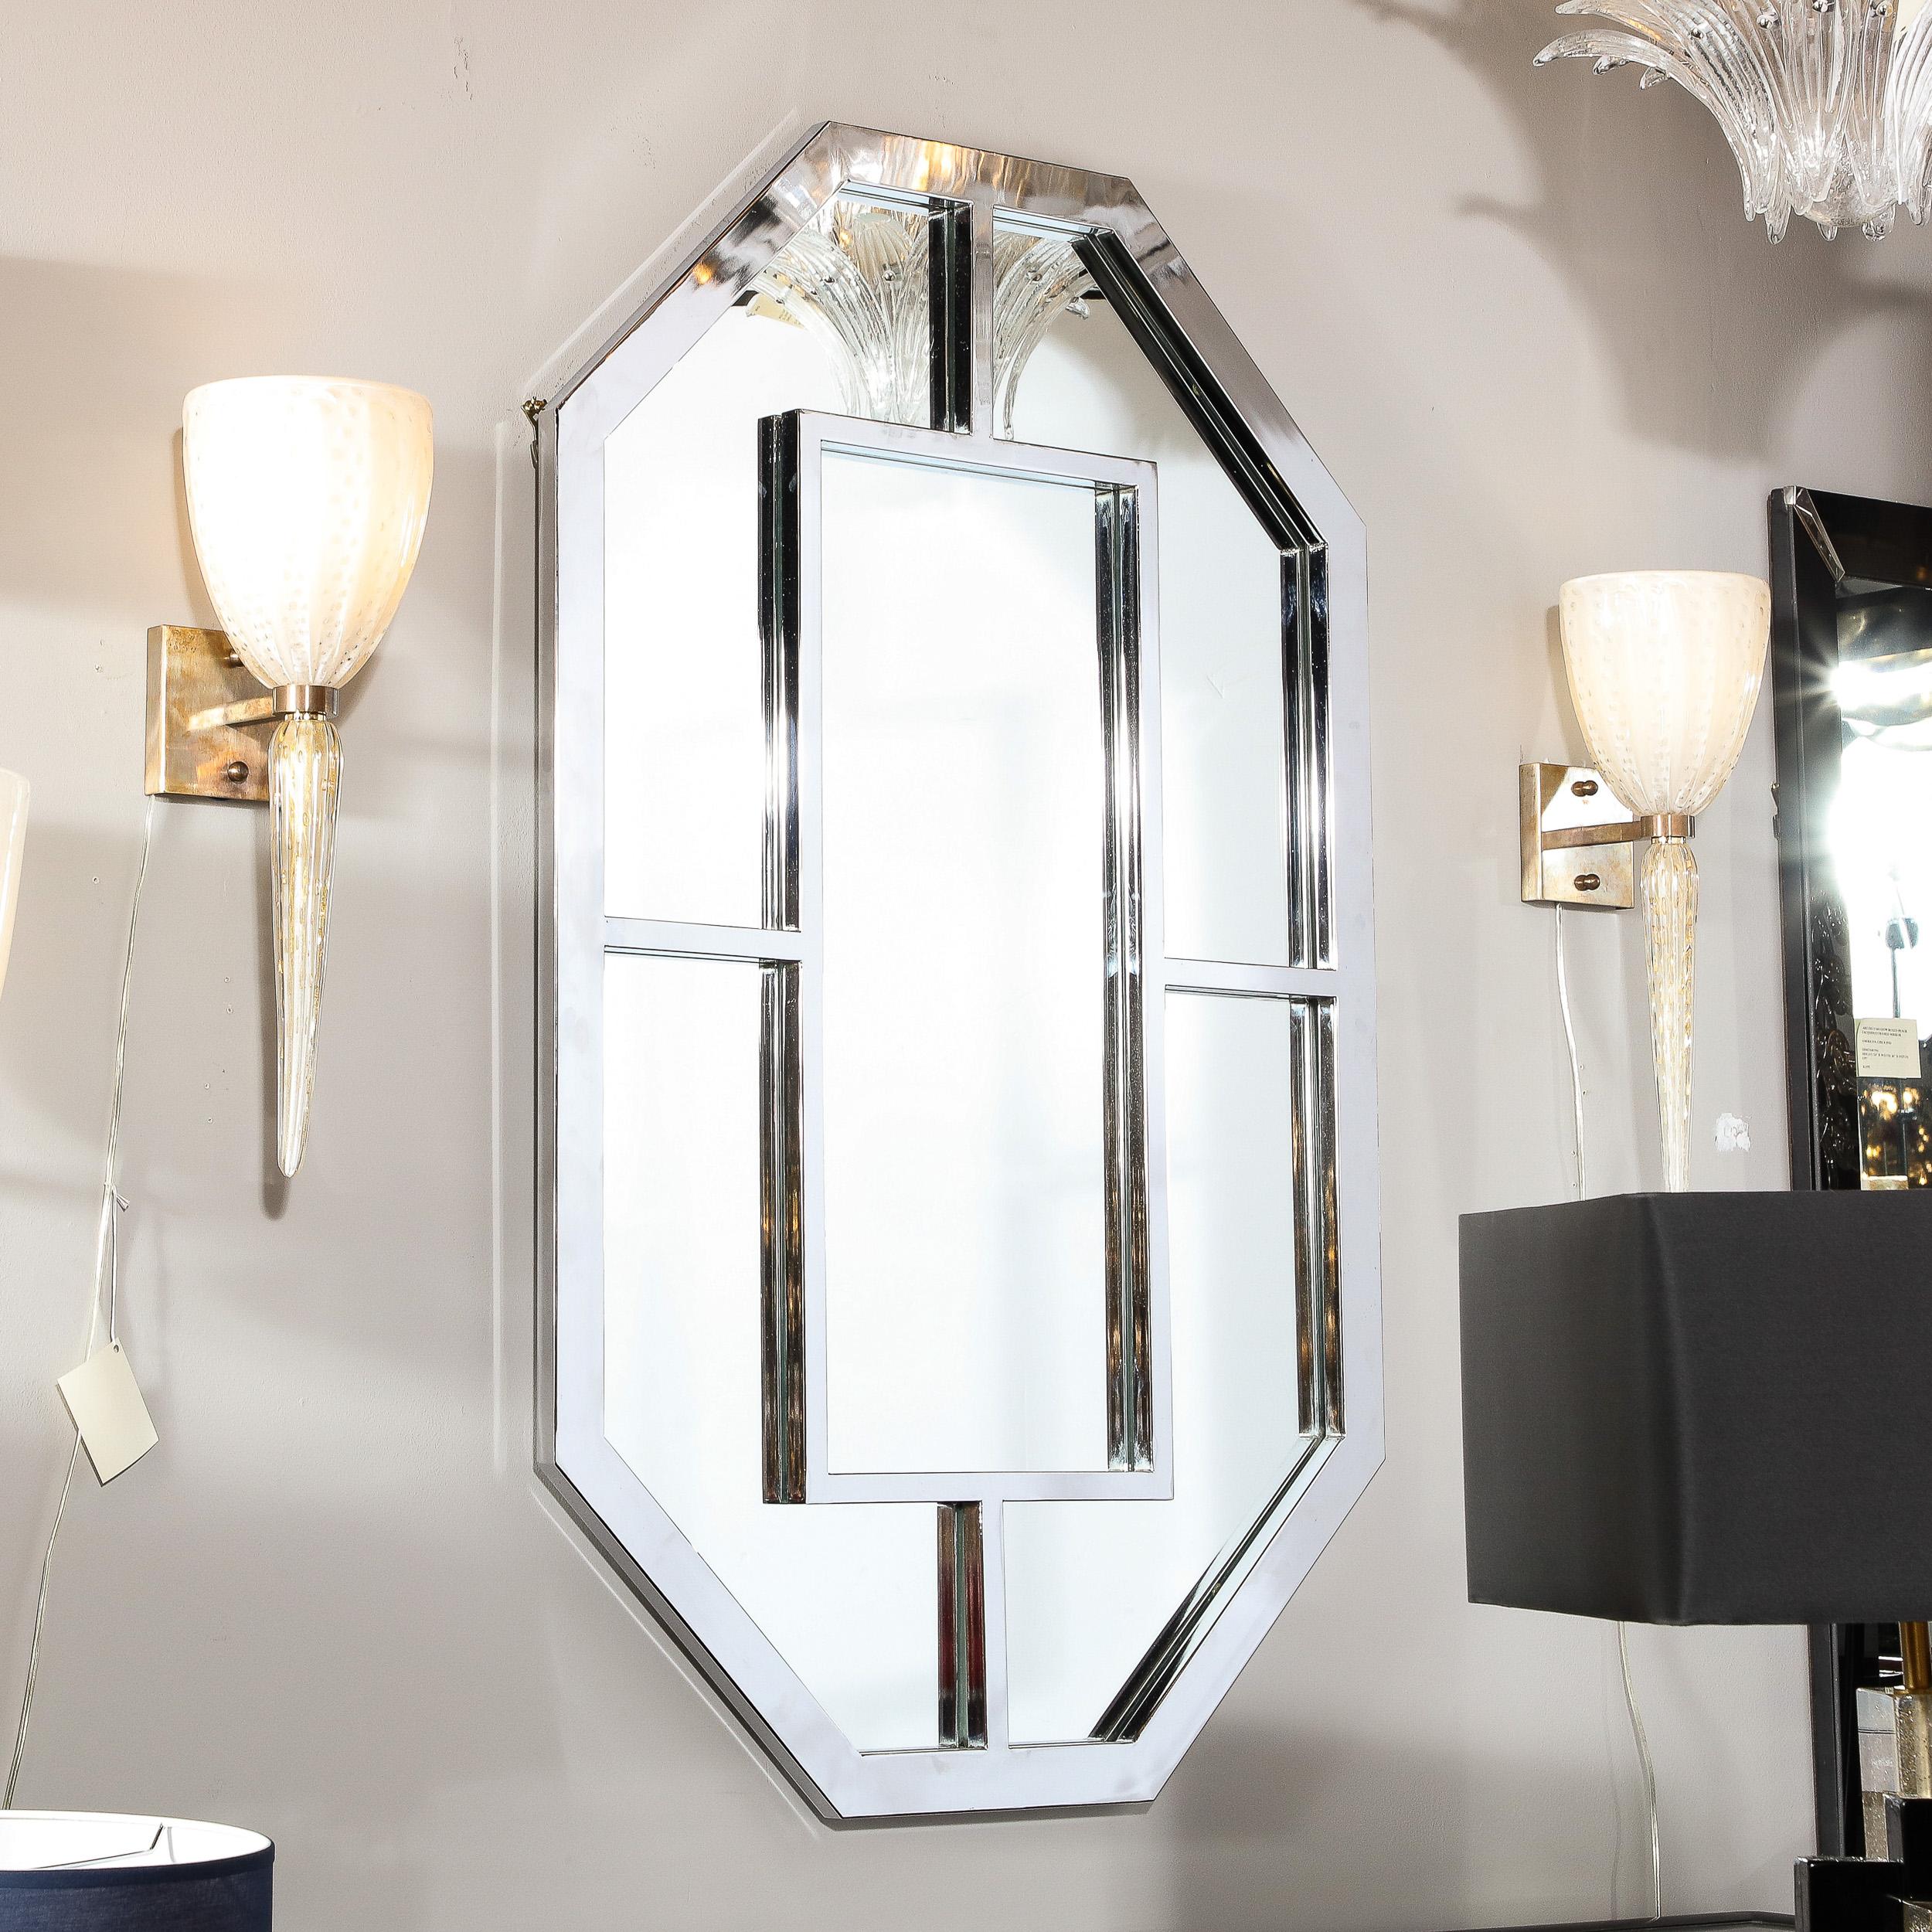 This stunning Mid Century Modern mirror was realized in The United States circa 1970. It offers an octagonal silhouette circumscribed in polished chrome with an open form square embellishment in the center connected to the exterior via volumetric